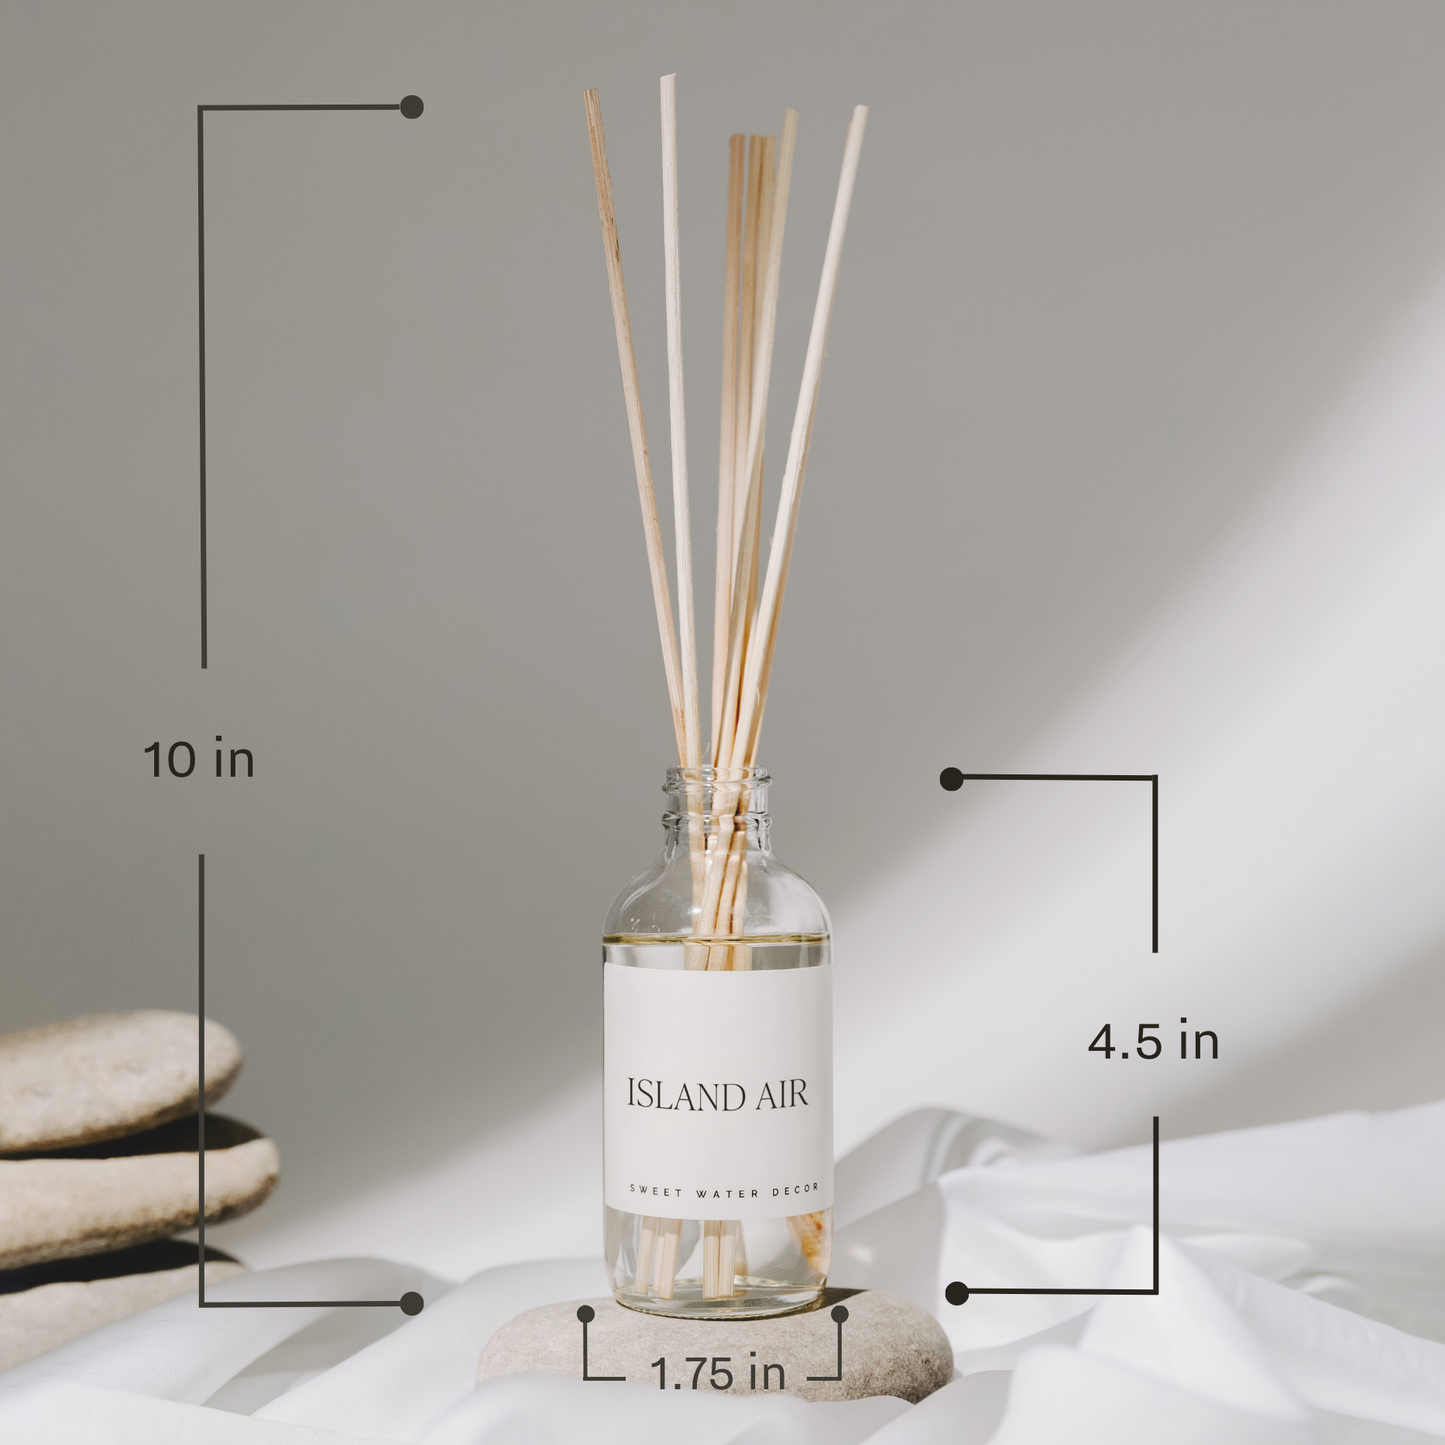 Lavender and Sage Reed Diffuser